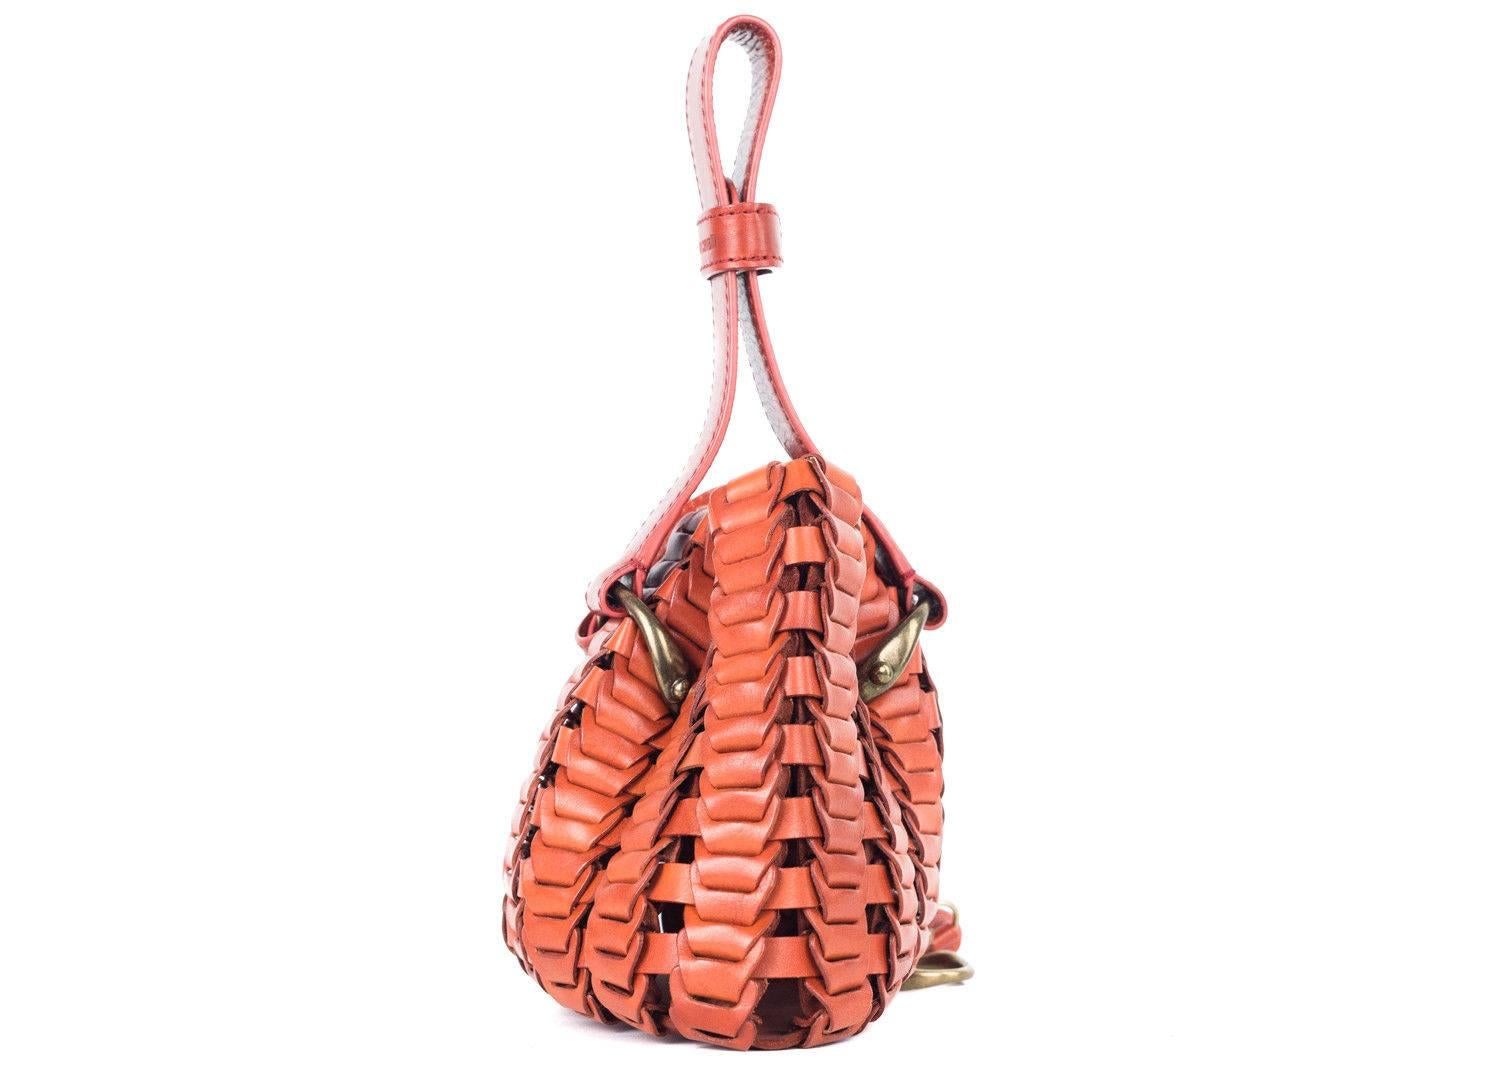 Roberto Cavalli copper orange bucket bag. This bag features a knit like pattern with a matching tassel and horse ornament on the tassel. Perfect for the incoming summer season, pair it with denim shorts and a cute floral top and sandals for a chic